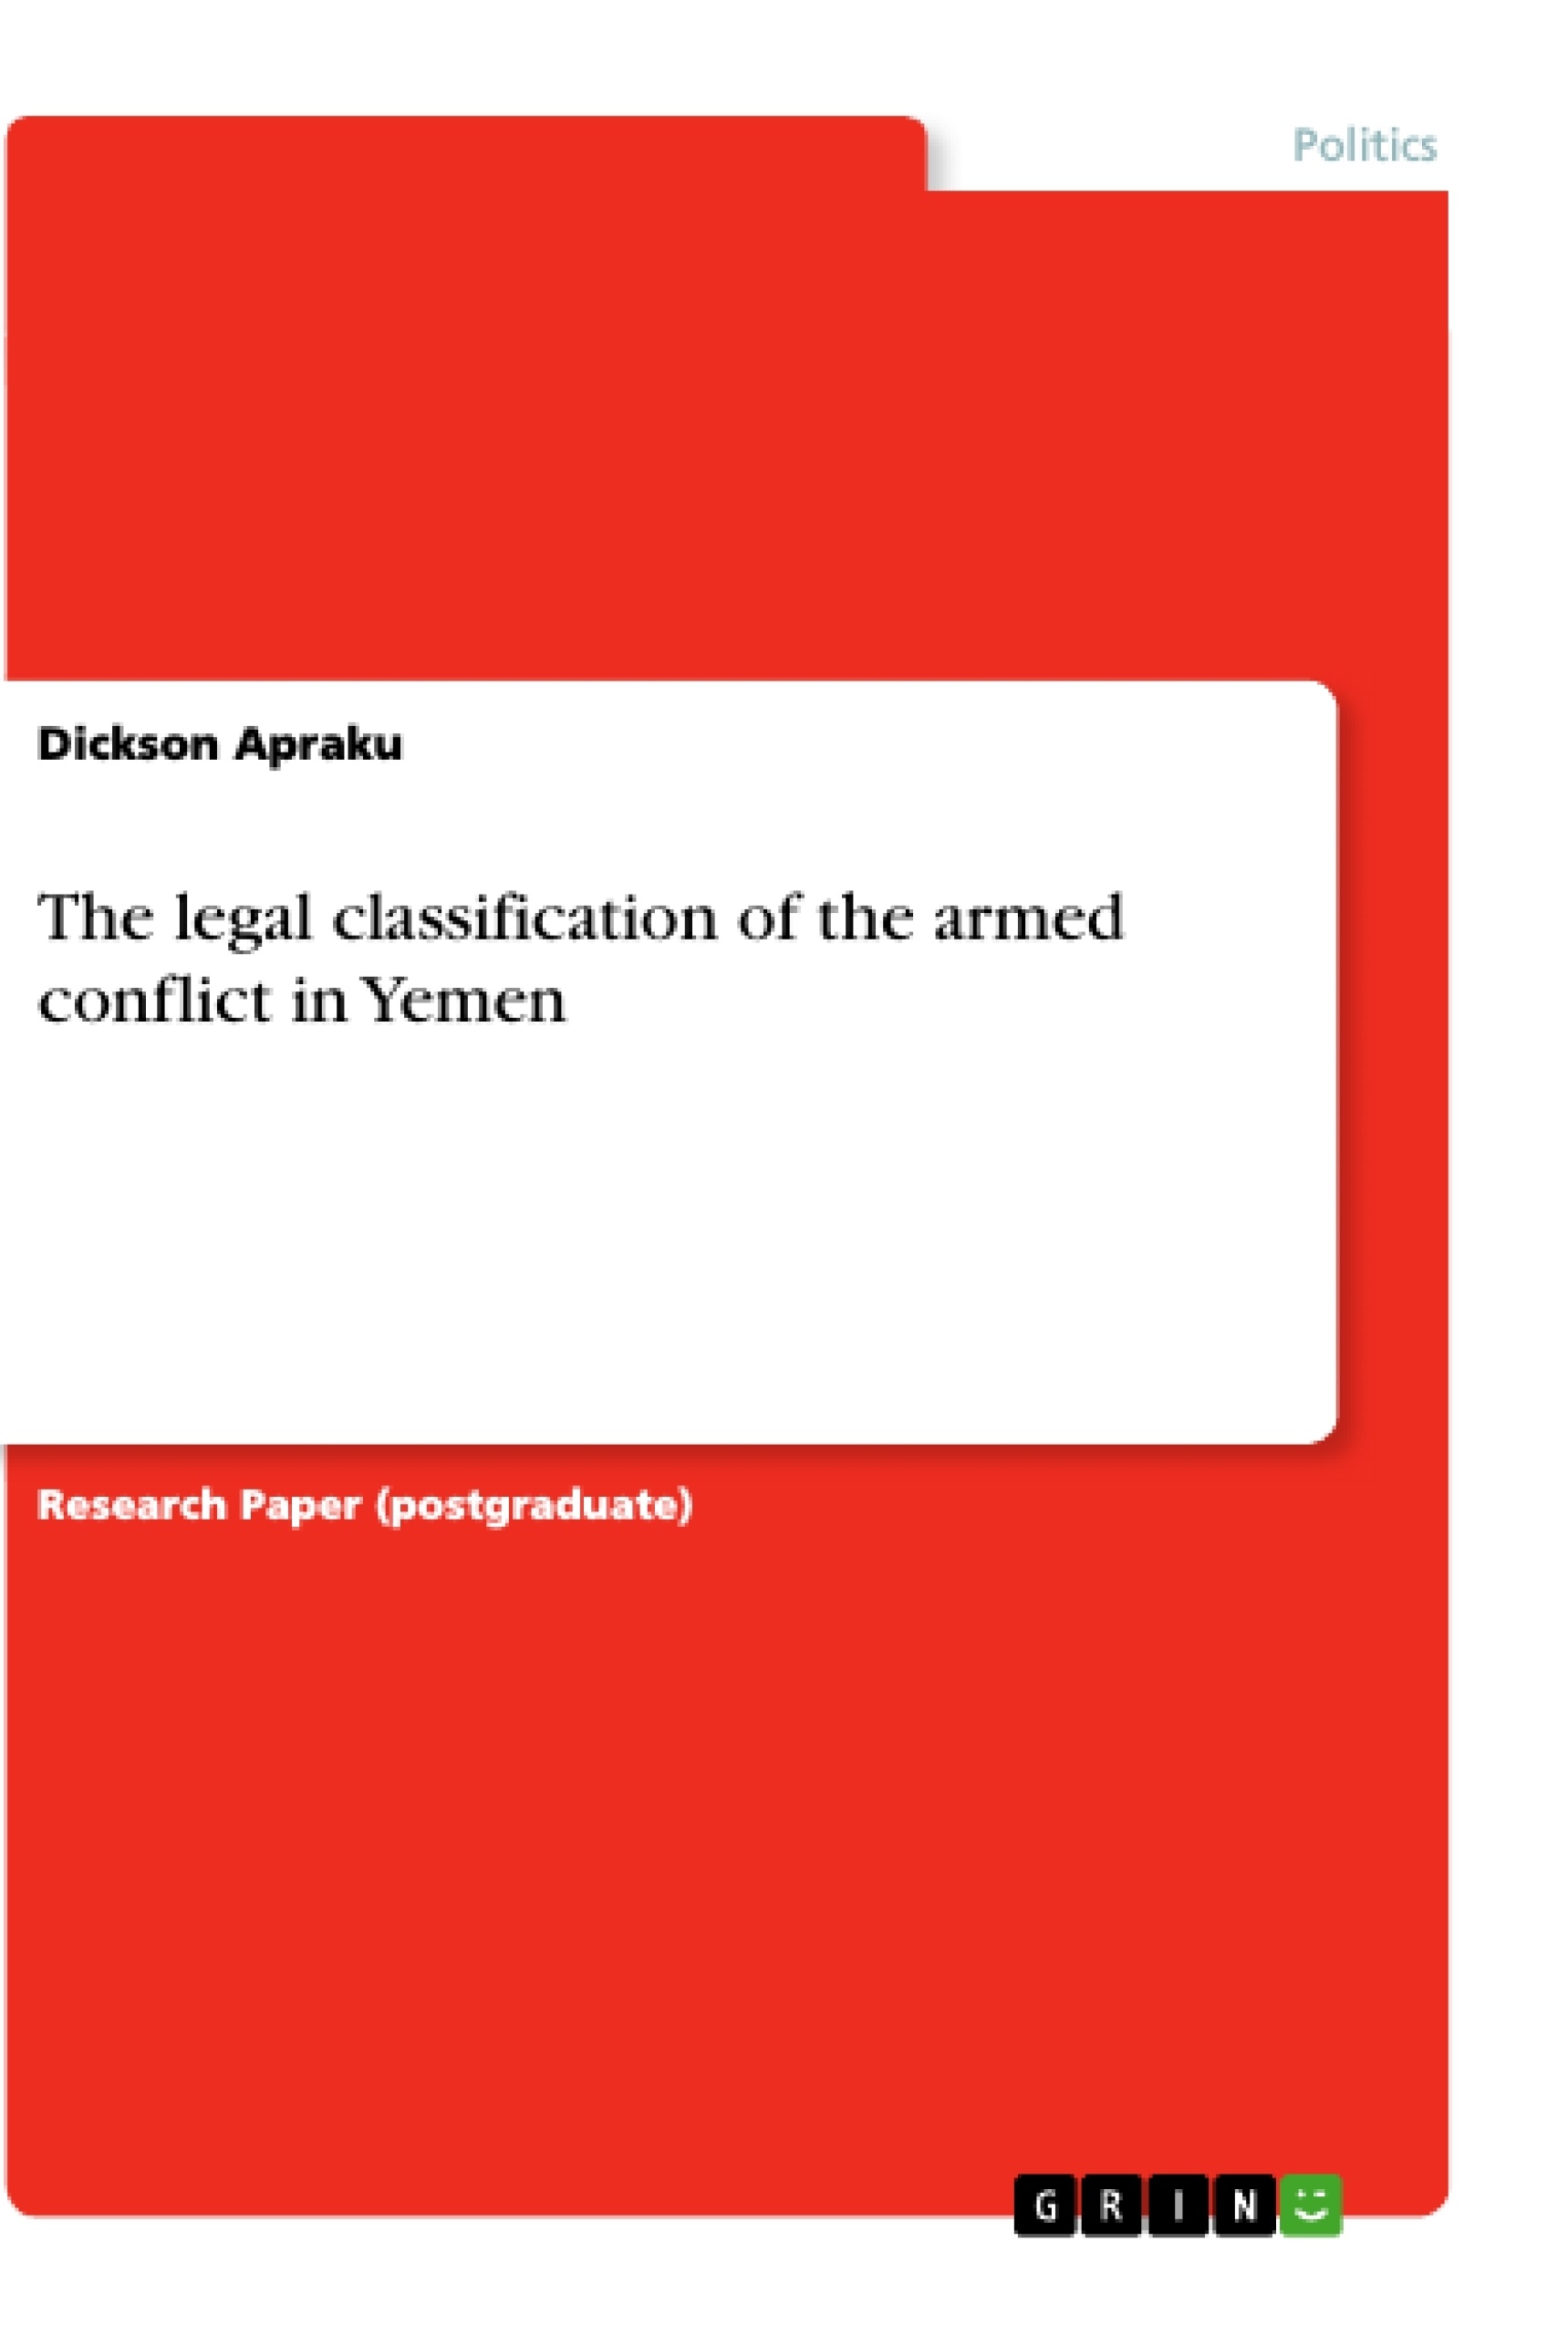 Titel: The legal classification of the armed conflict in Yemen